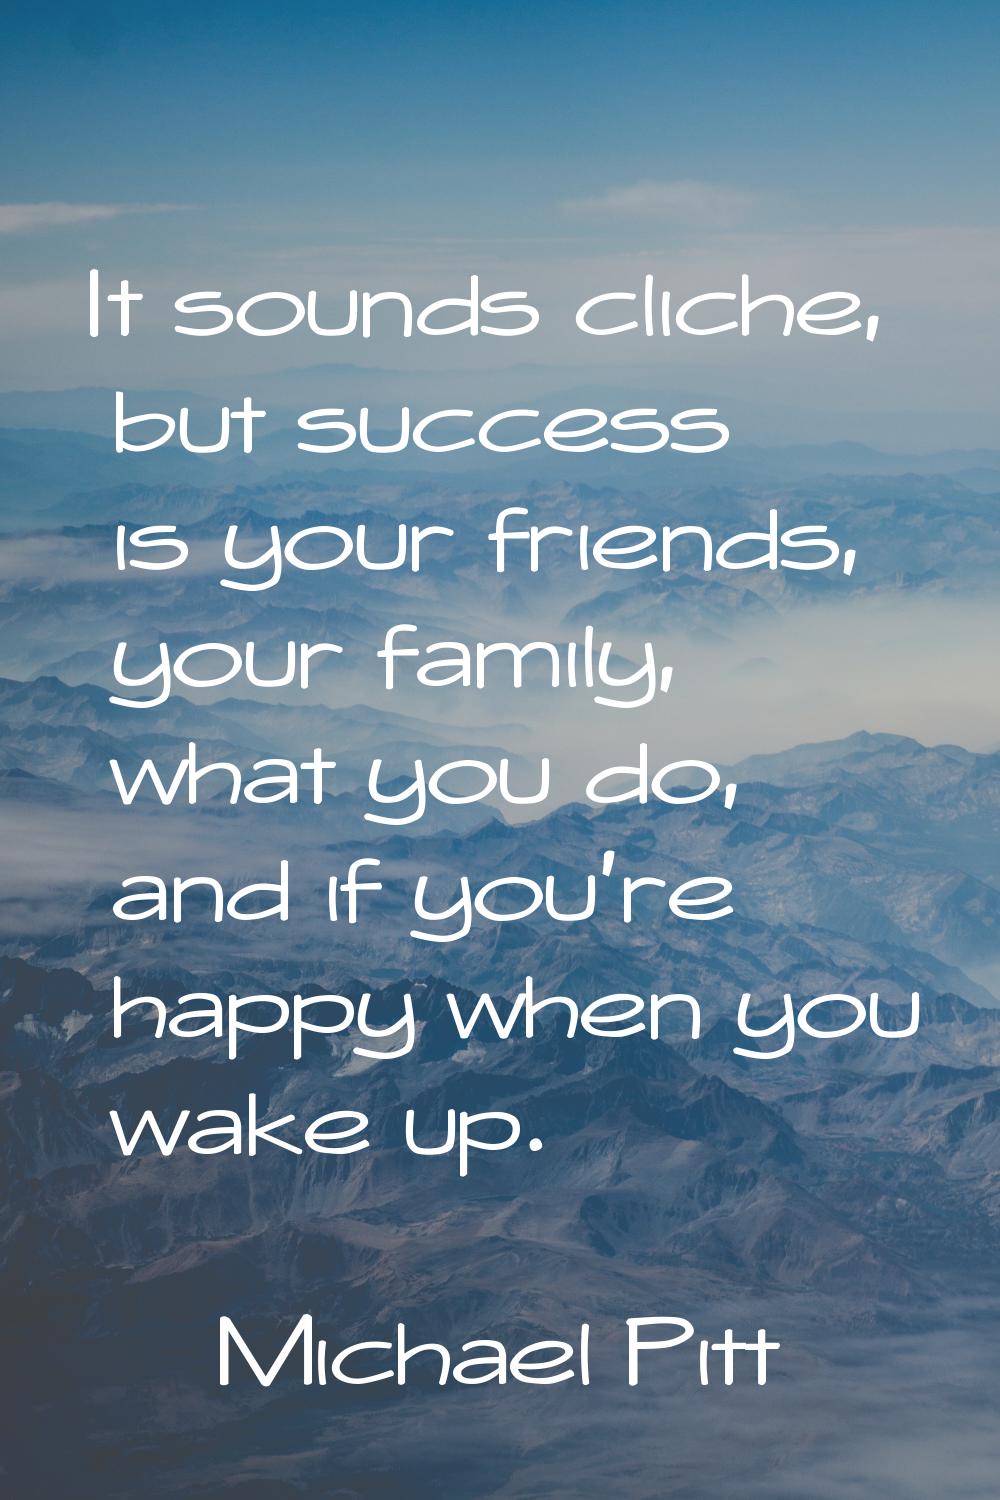 It sounds cliche, but success is your friends, your family, what you do, and if you're happy when y